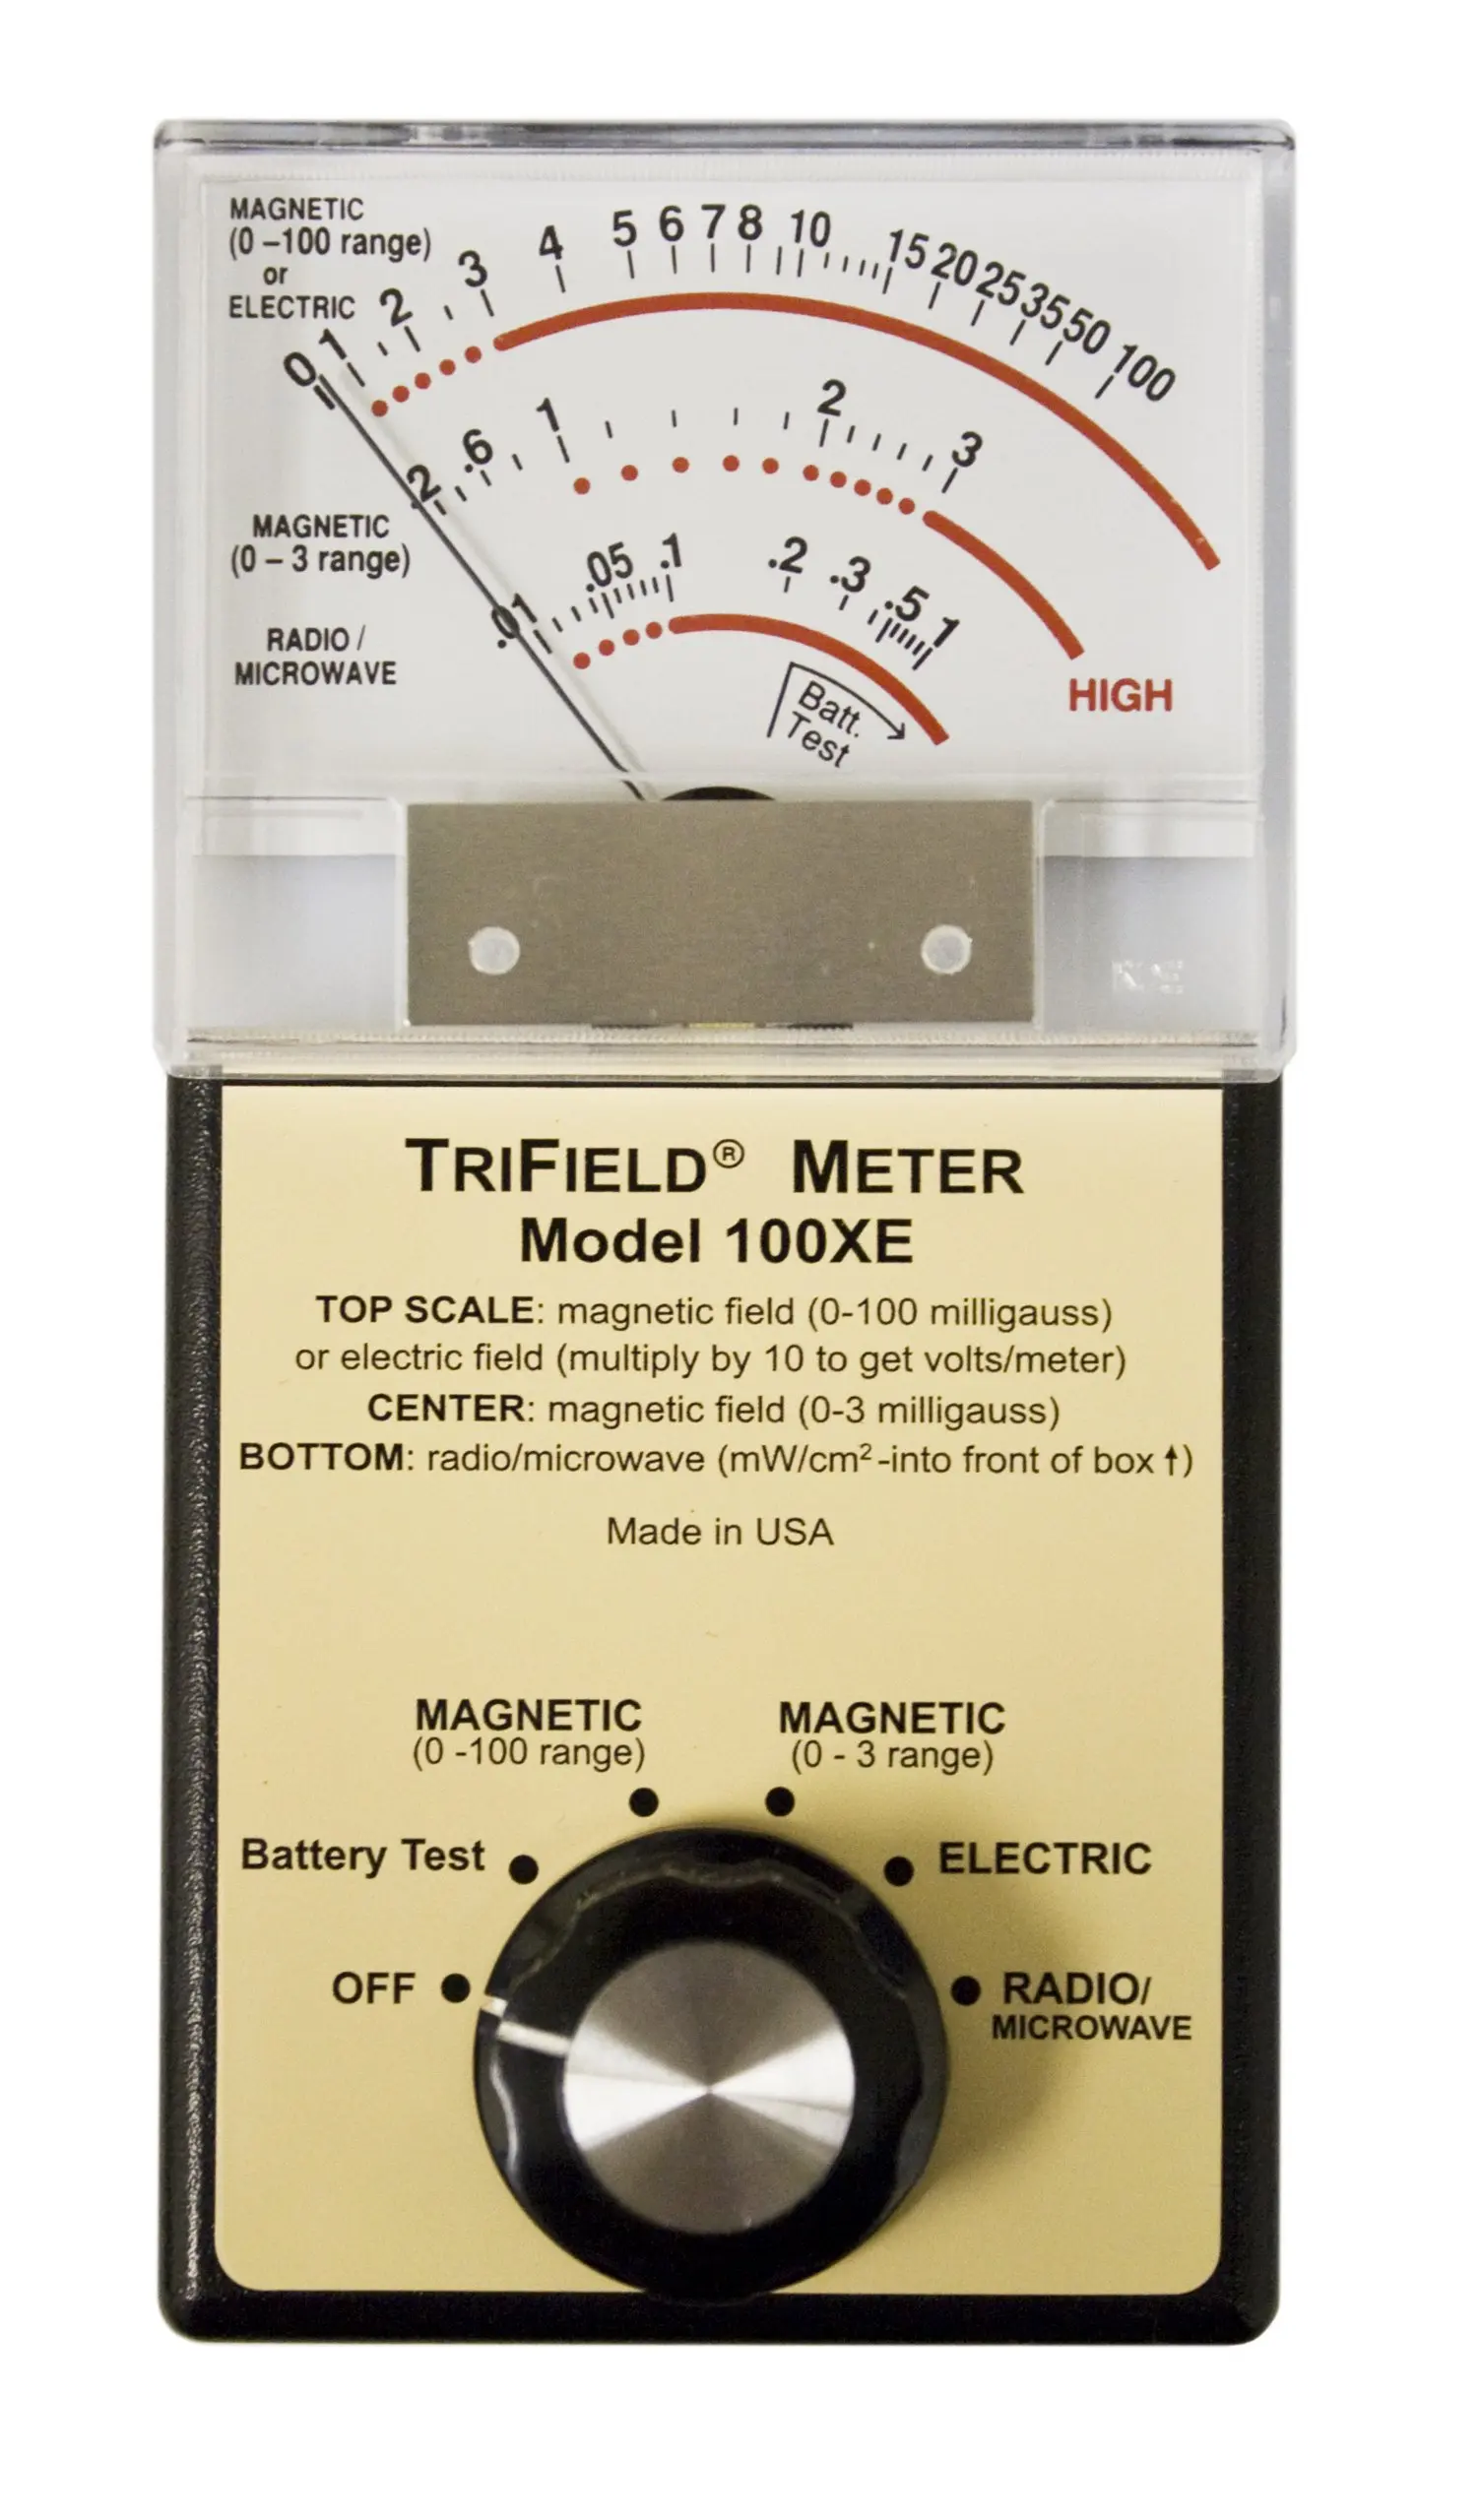 Buy Trifield 100xe Emf Meter In Cheap Price On Alibaba 